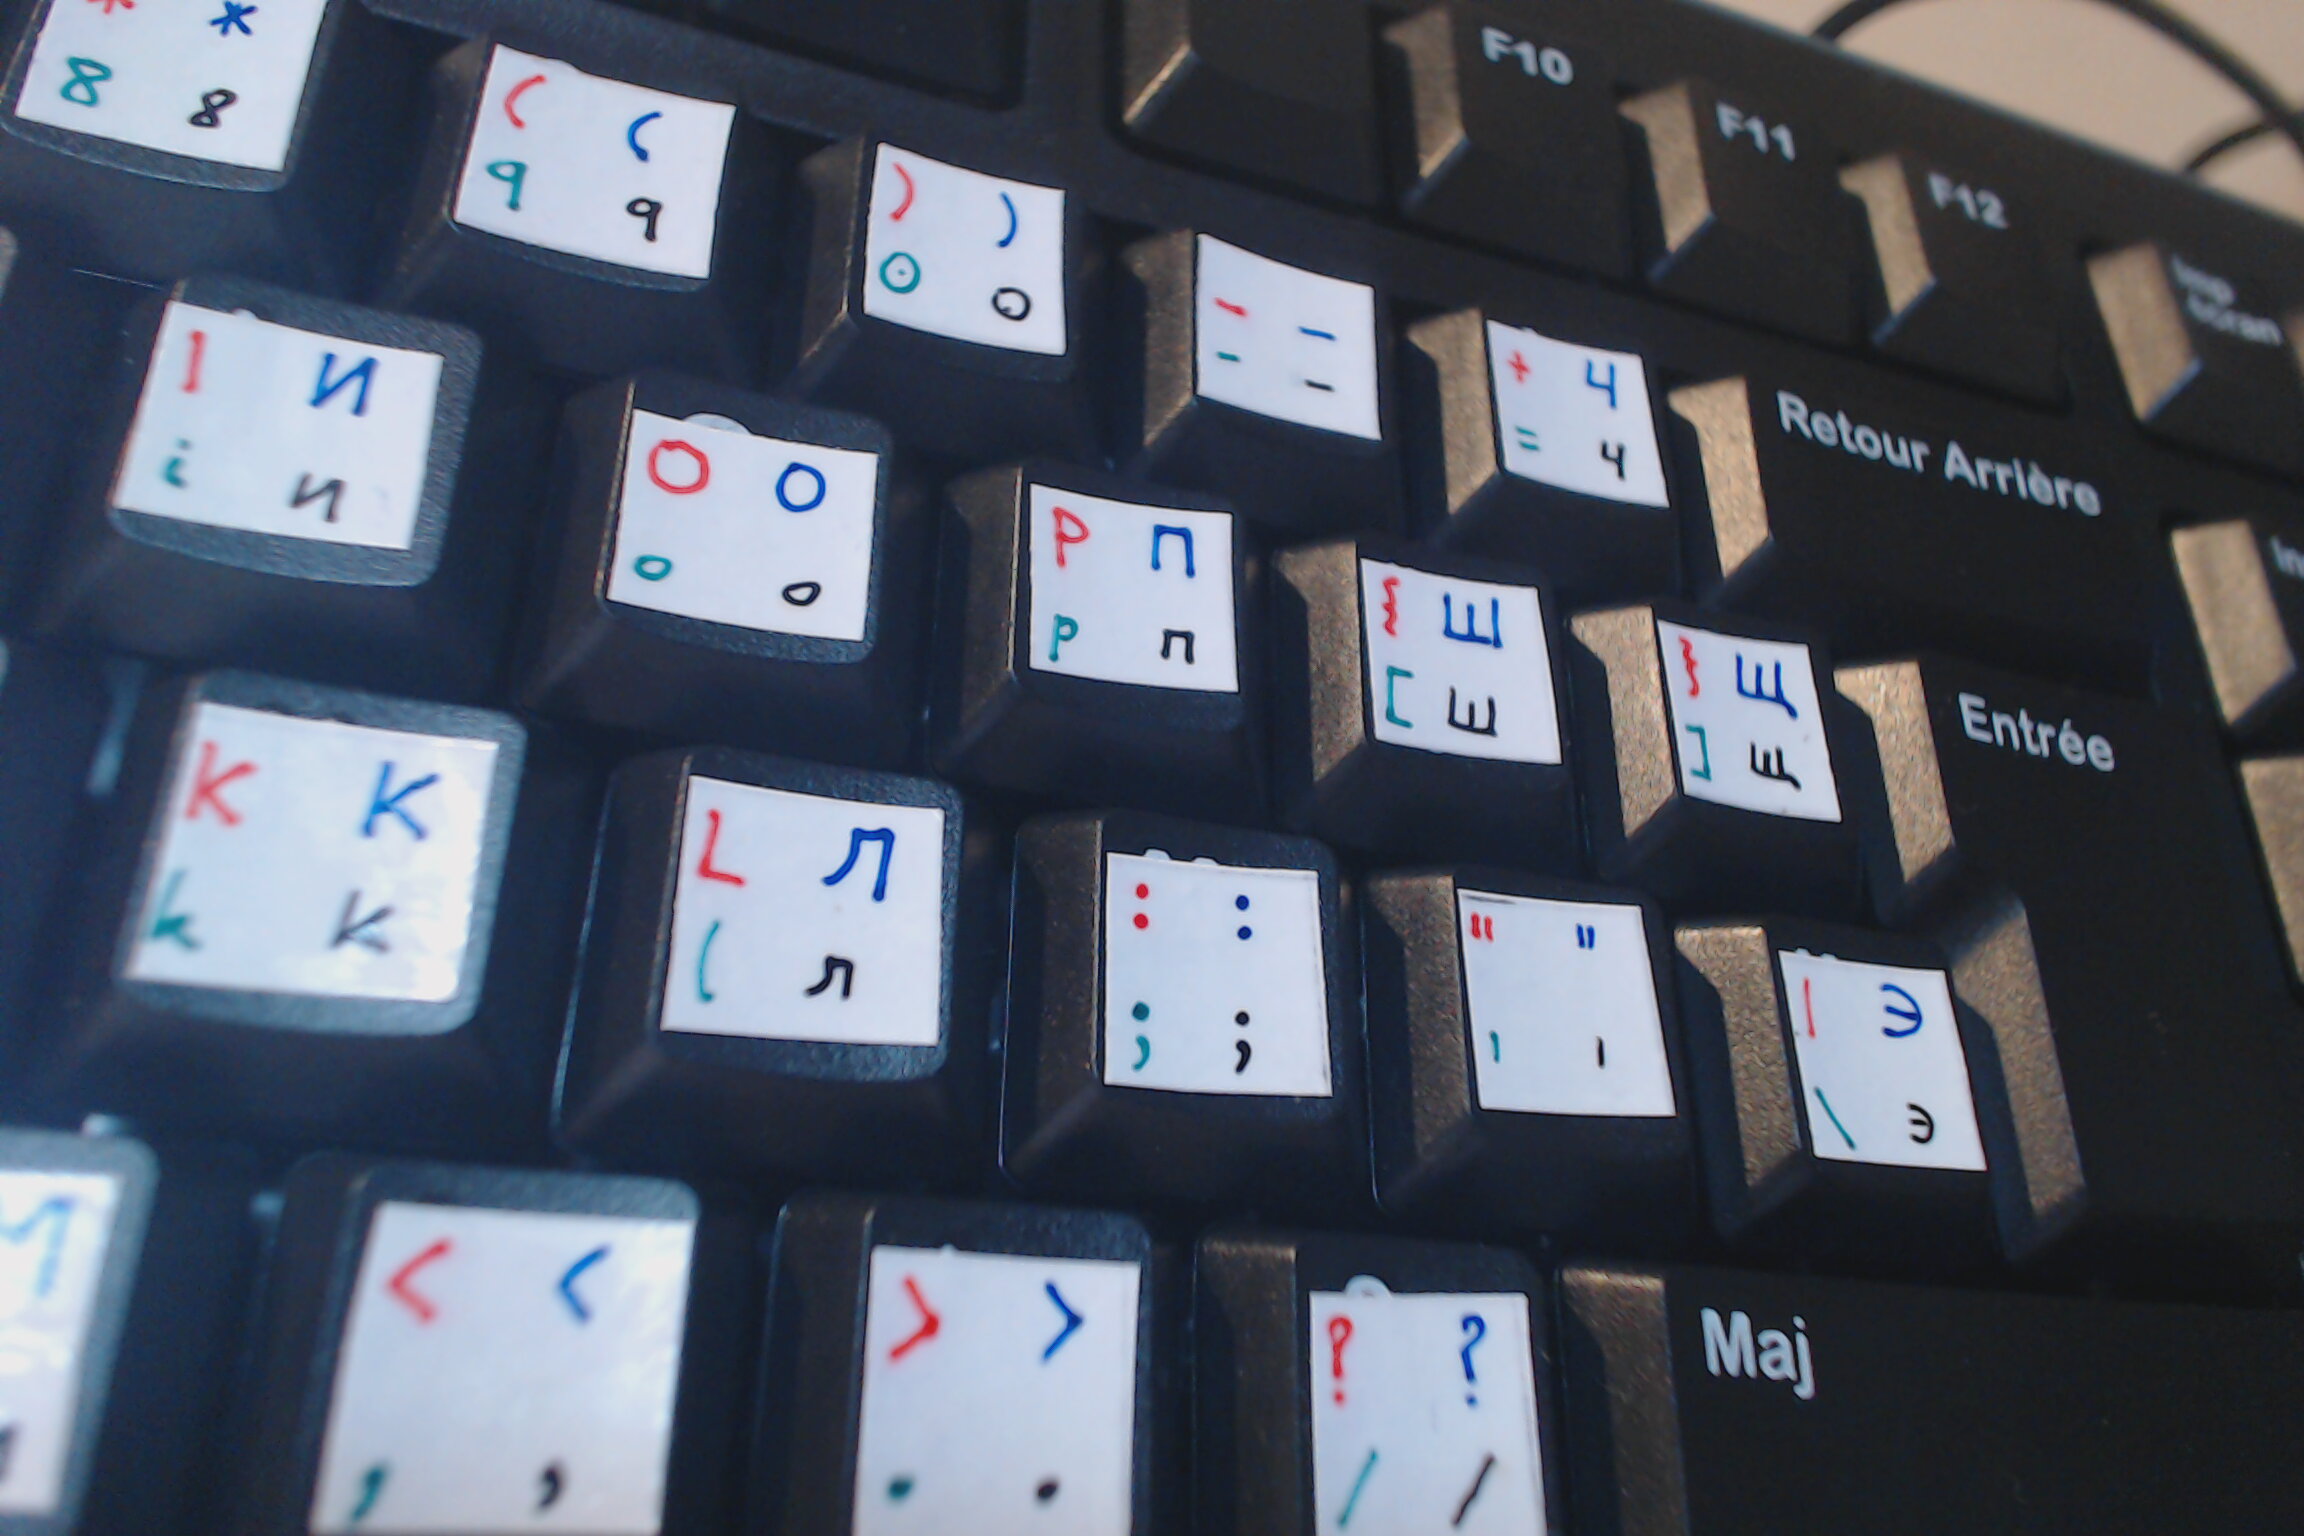 My hand-made Russian (phonetic) keyboards, image 11 of 14